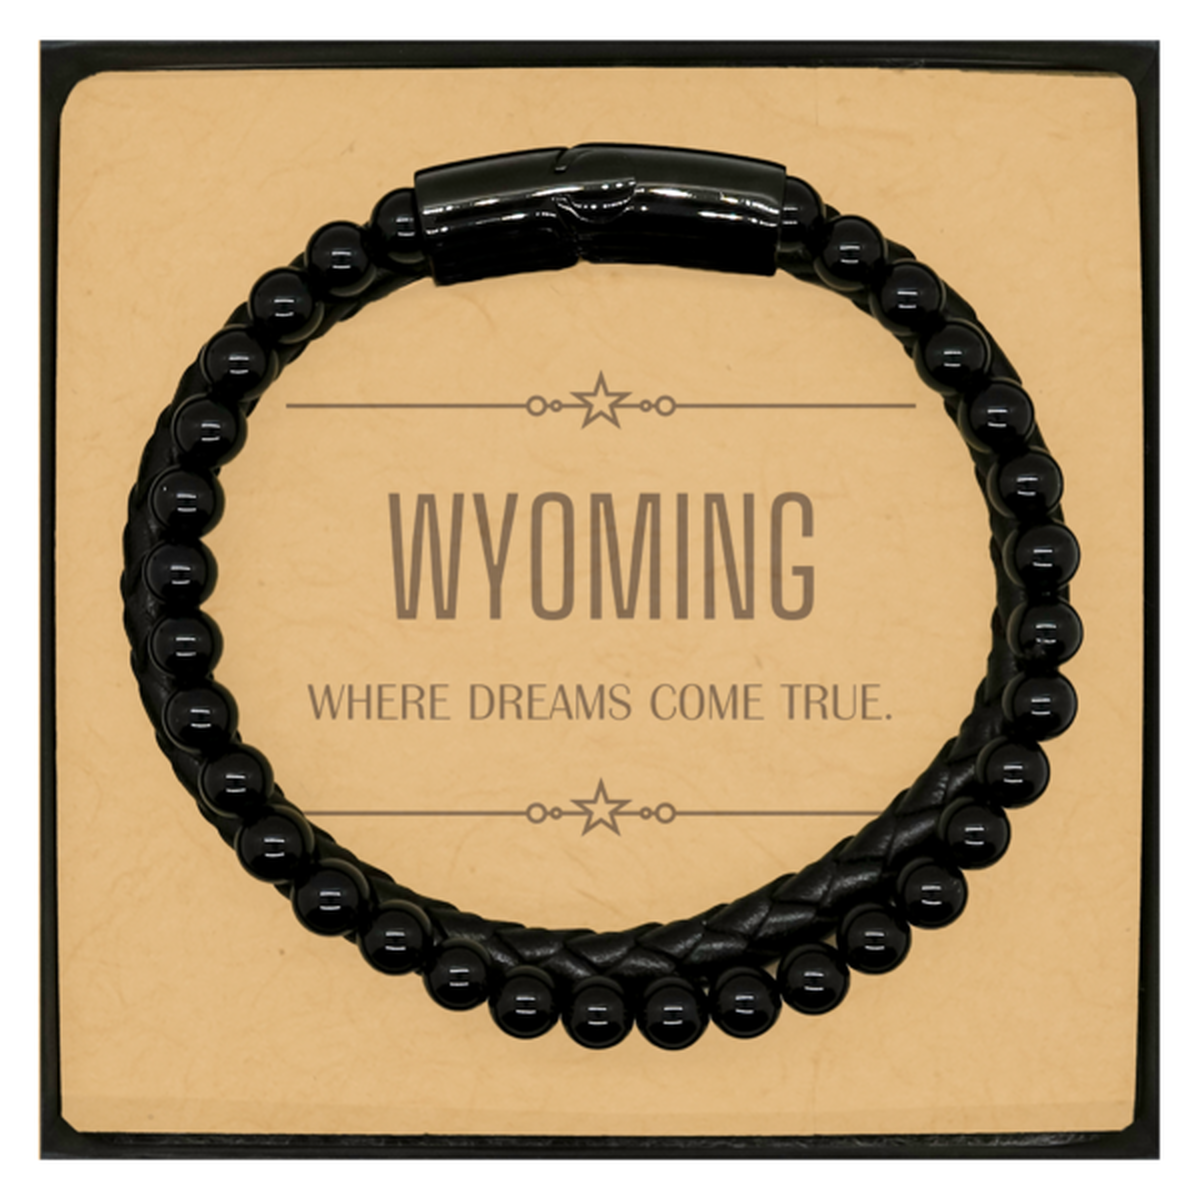 Love Wyoming State Stone Leather Bracelets, Wyoming Where dreams come true, Birthday Christmas Inspirational Gifts For Wyoming Men, Women, Friends